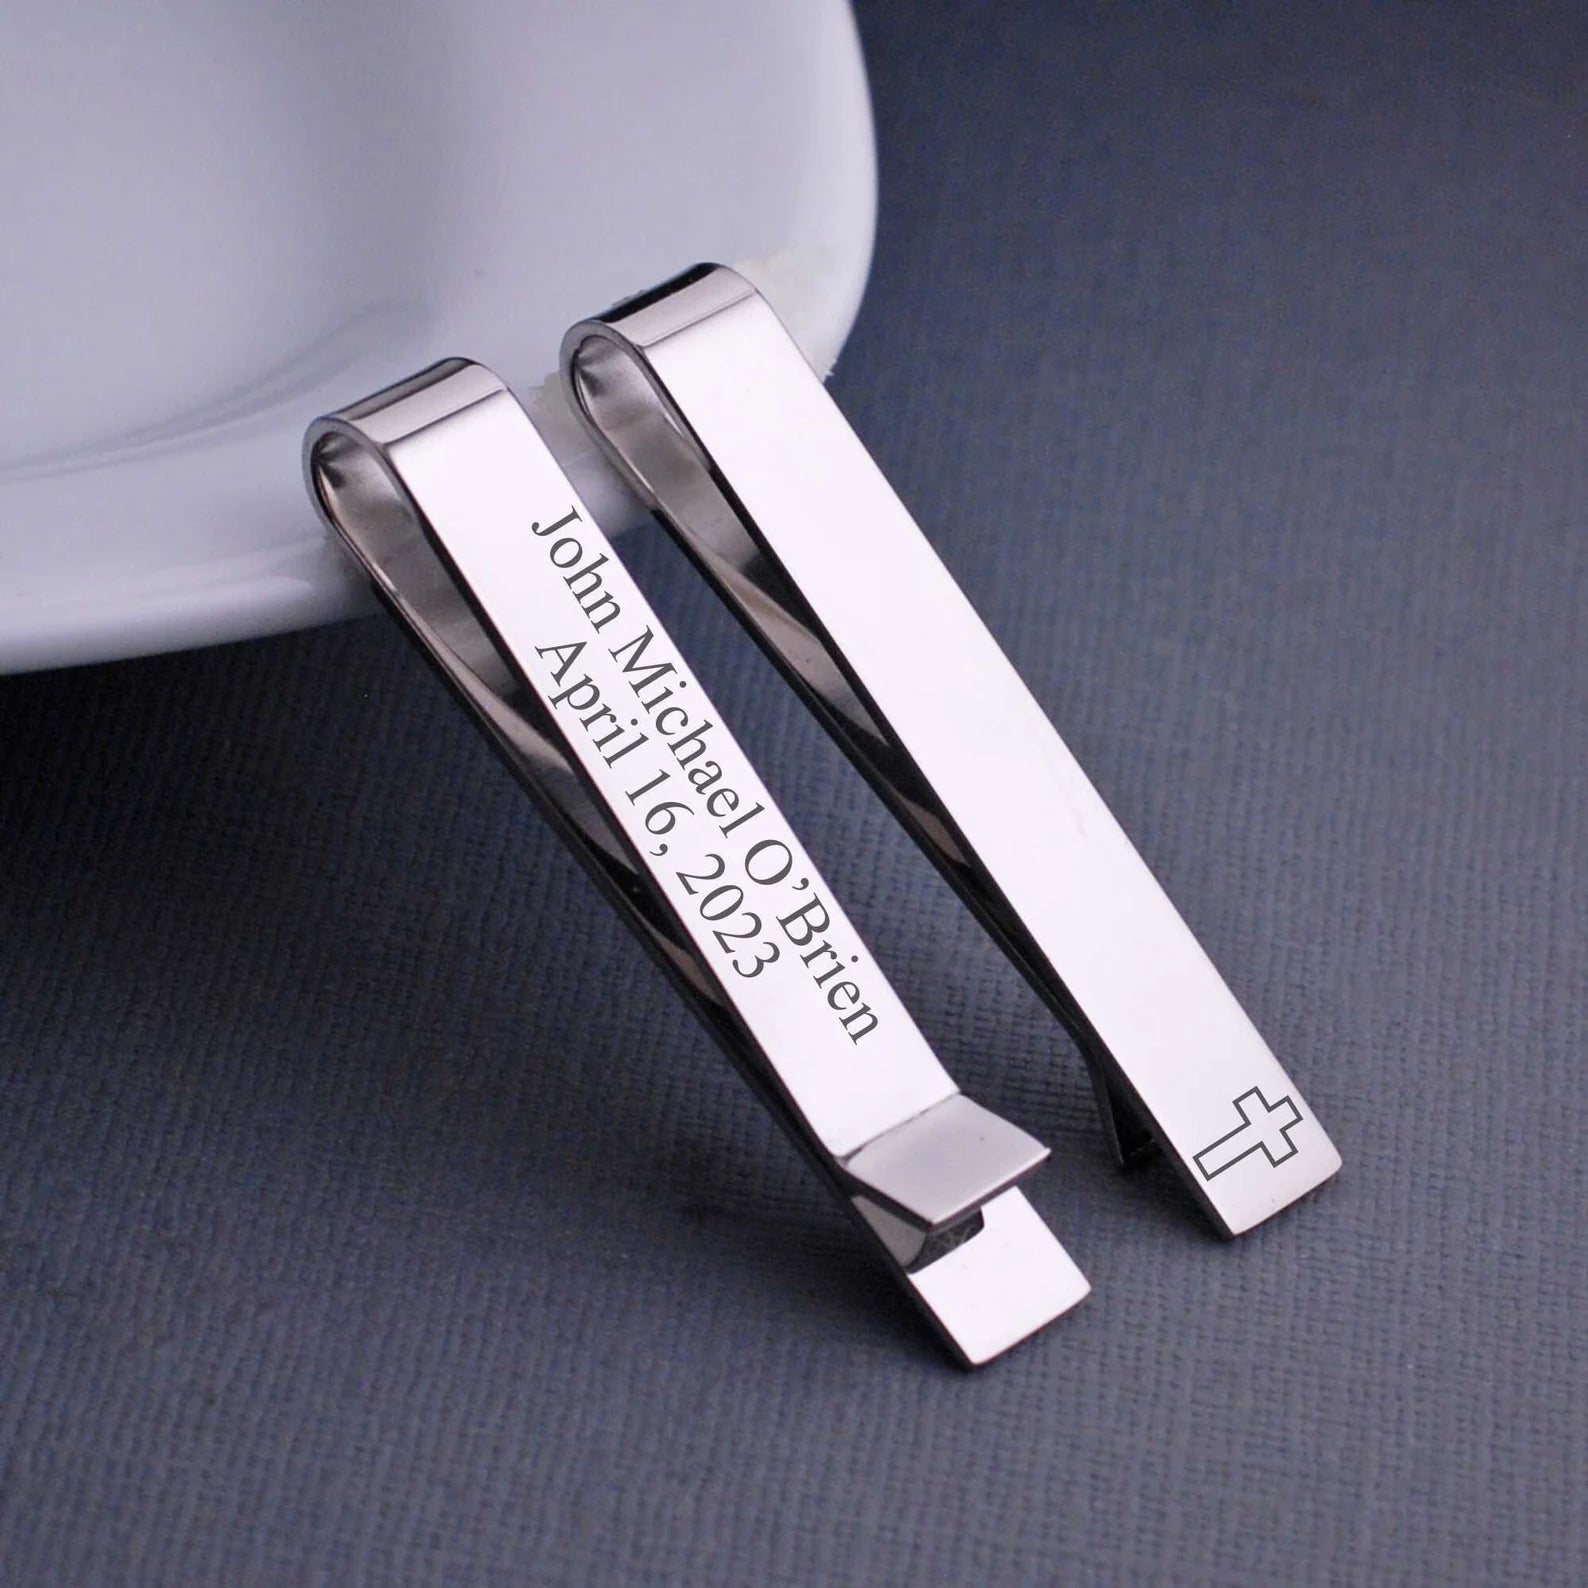 First Communion or Confirmation Tie Clip